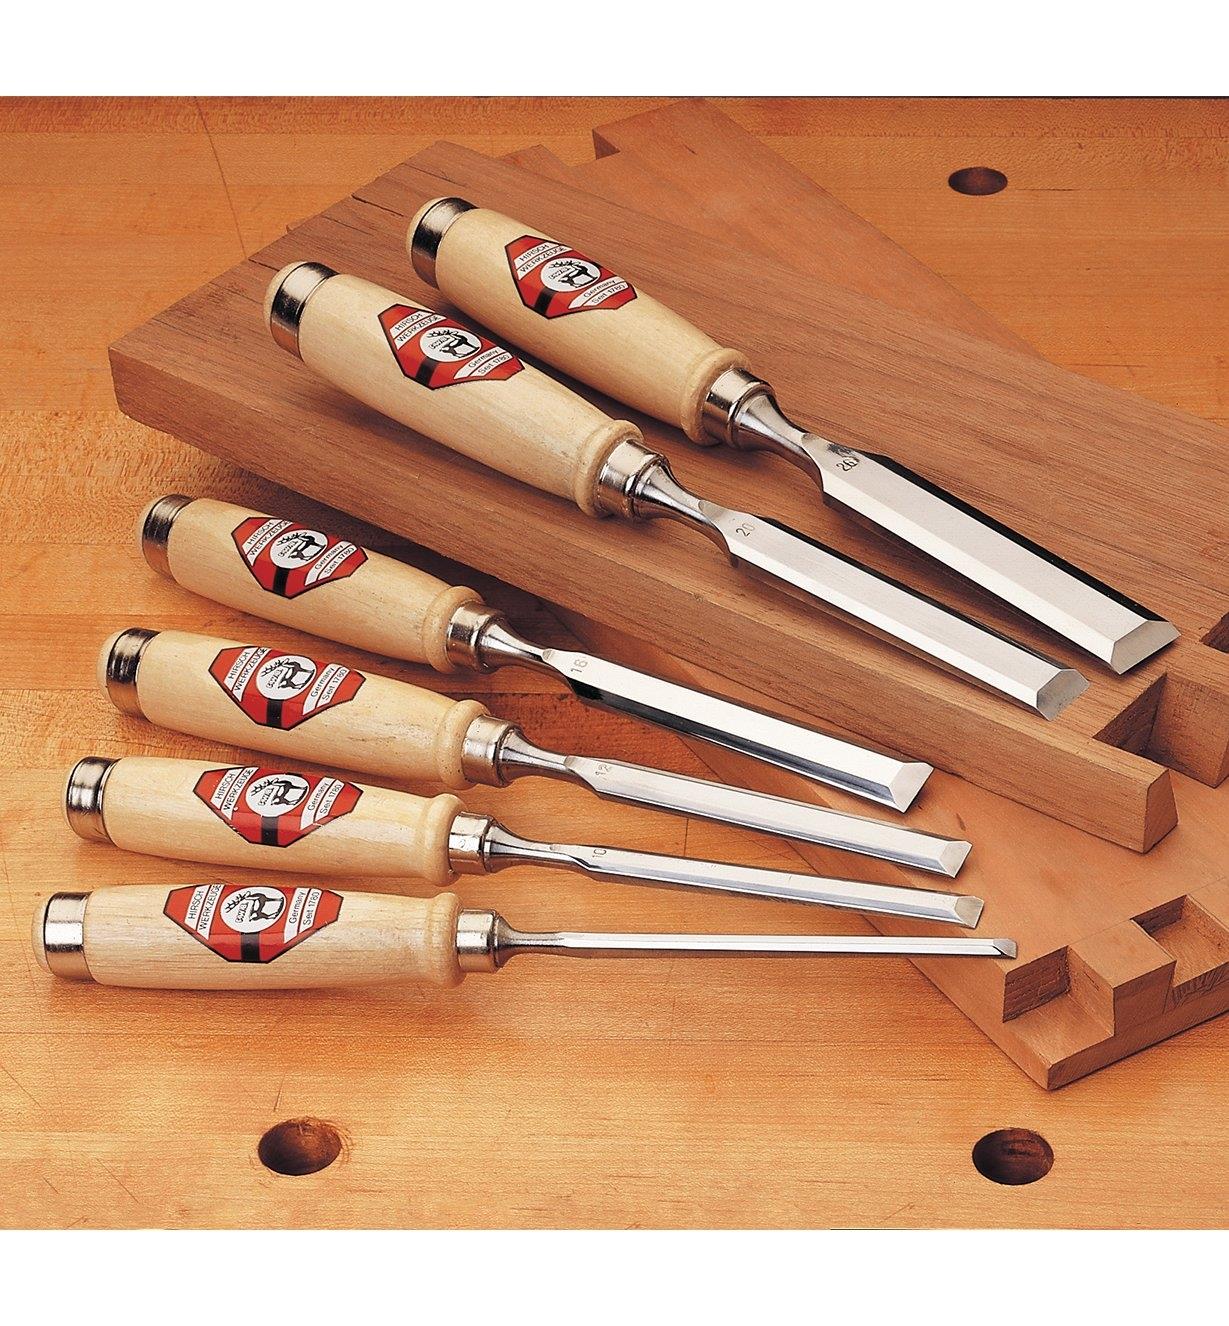 Hirsch Firmer Chisels lying on a workbench with boards cut with dovetail joints